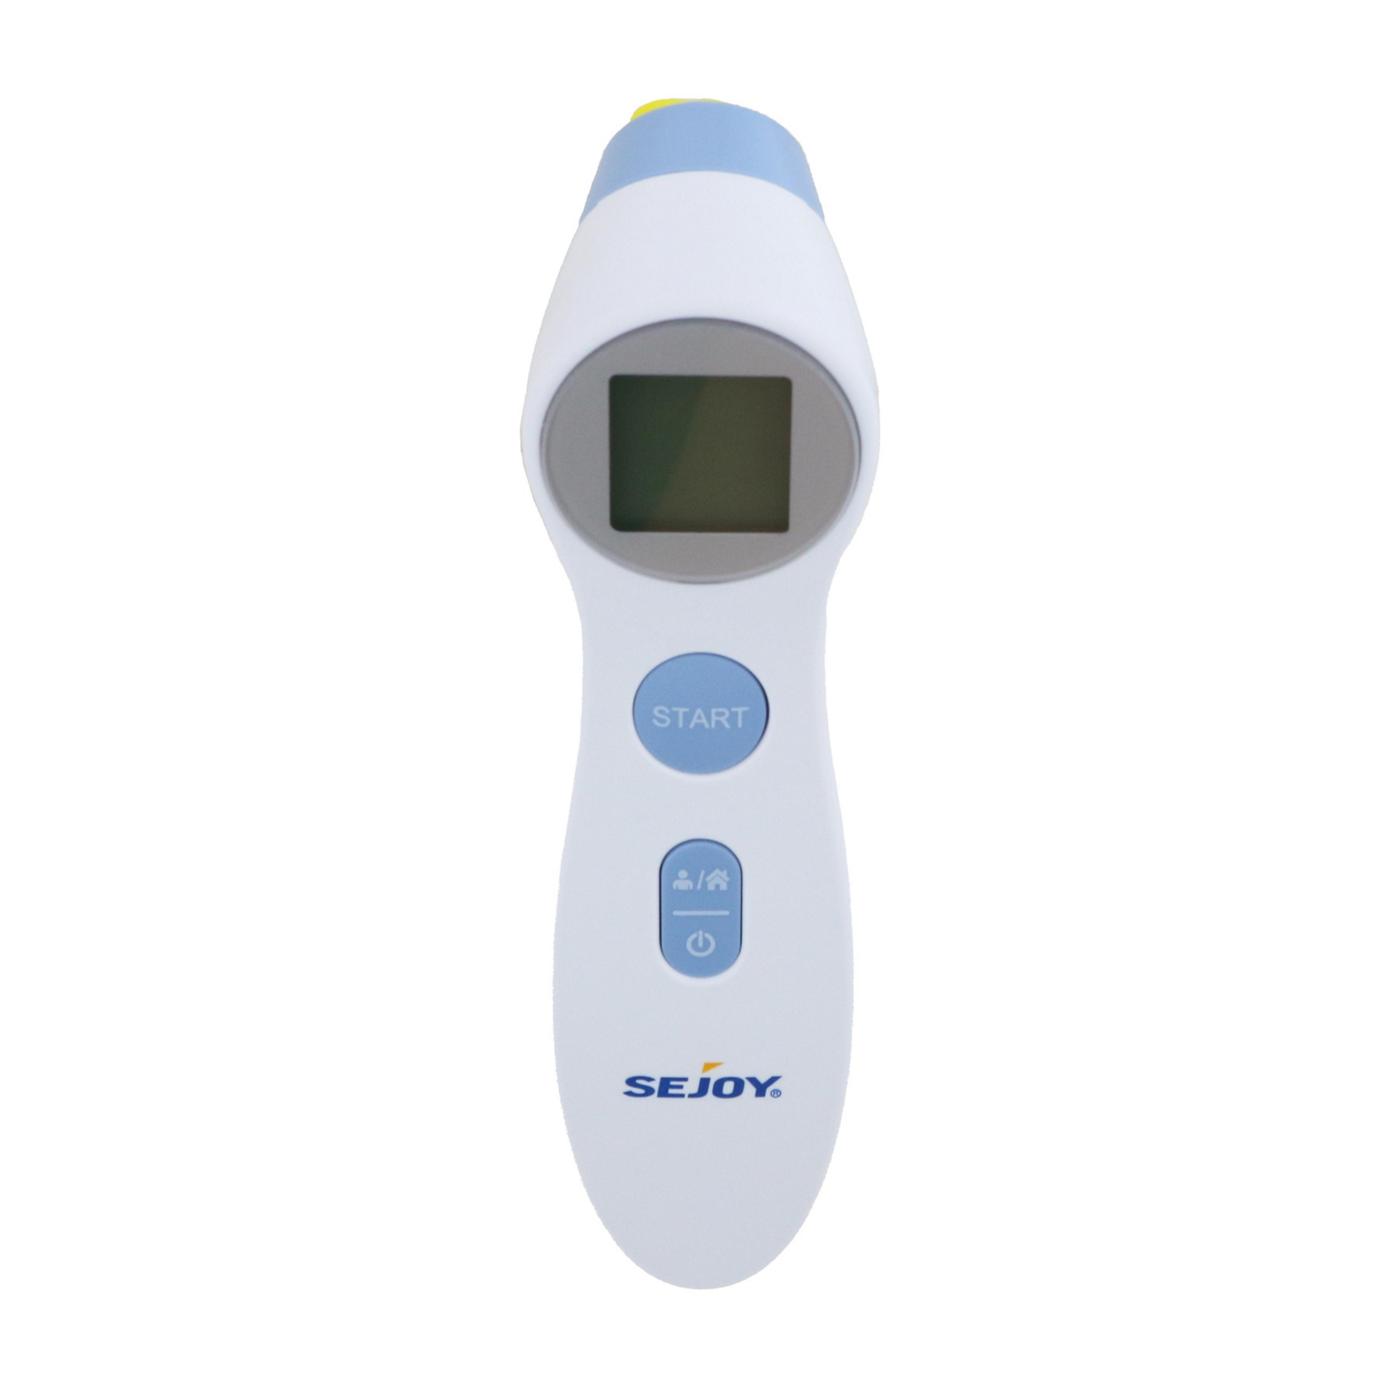 Sejoy Infrared Forehead Thermometer; image 2 of 3